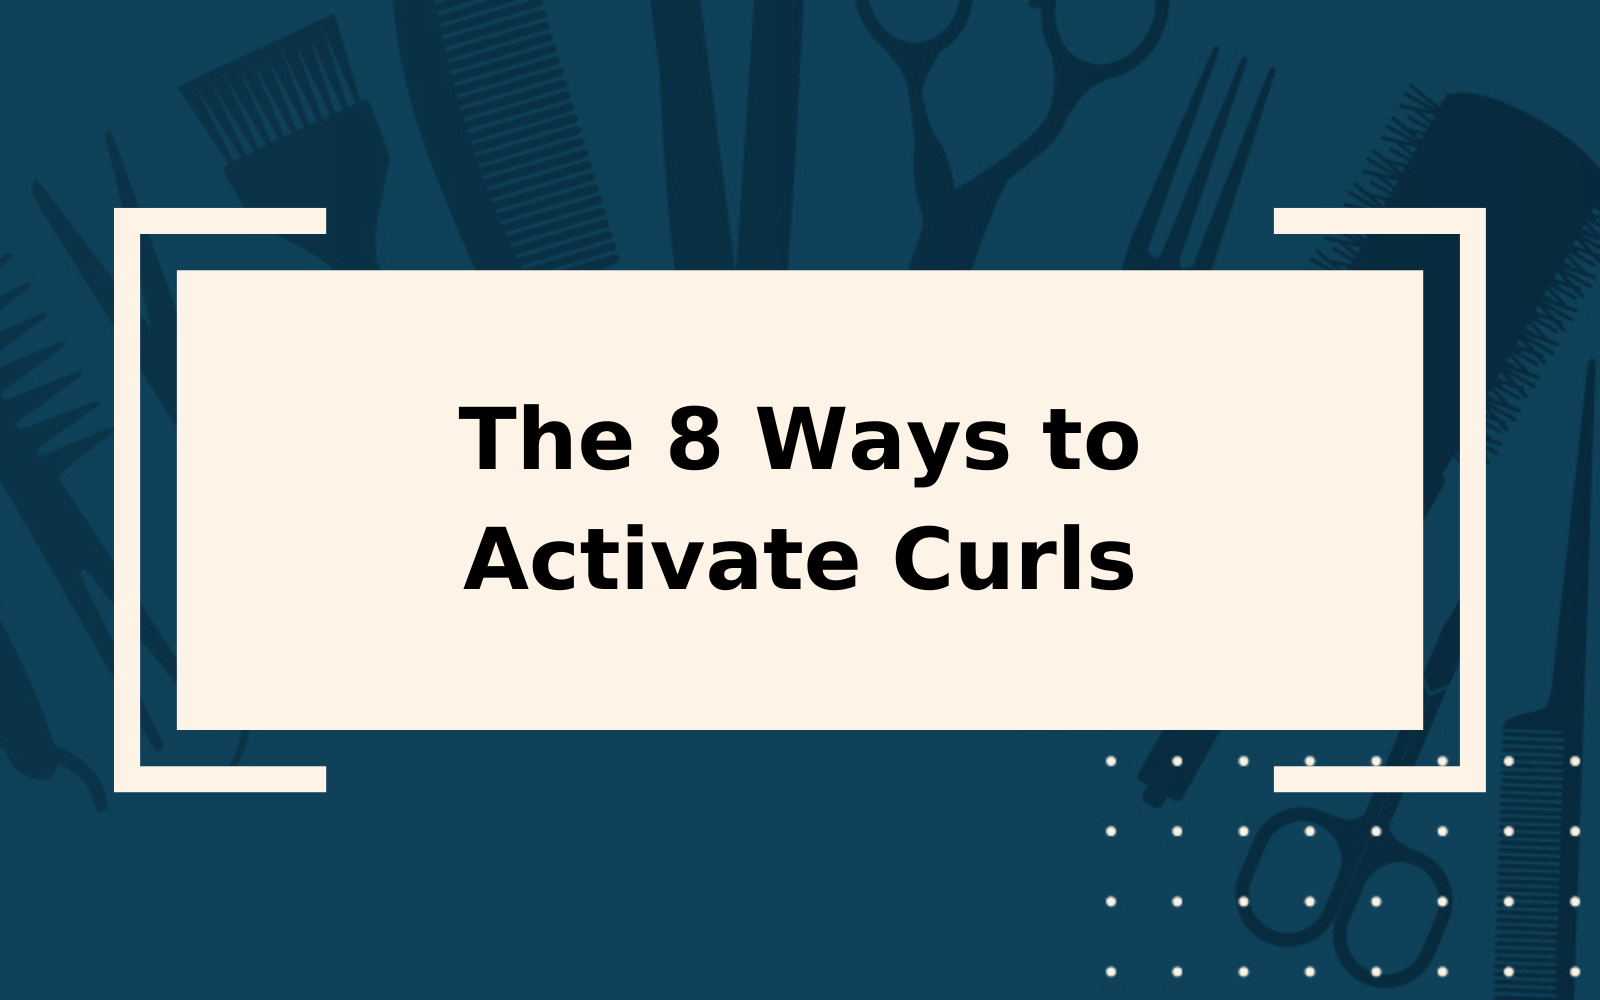 How to Activate Curls 8 Ways | Step-by-Step Guide